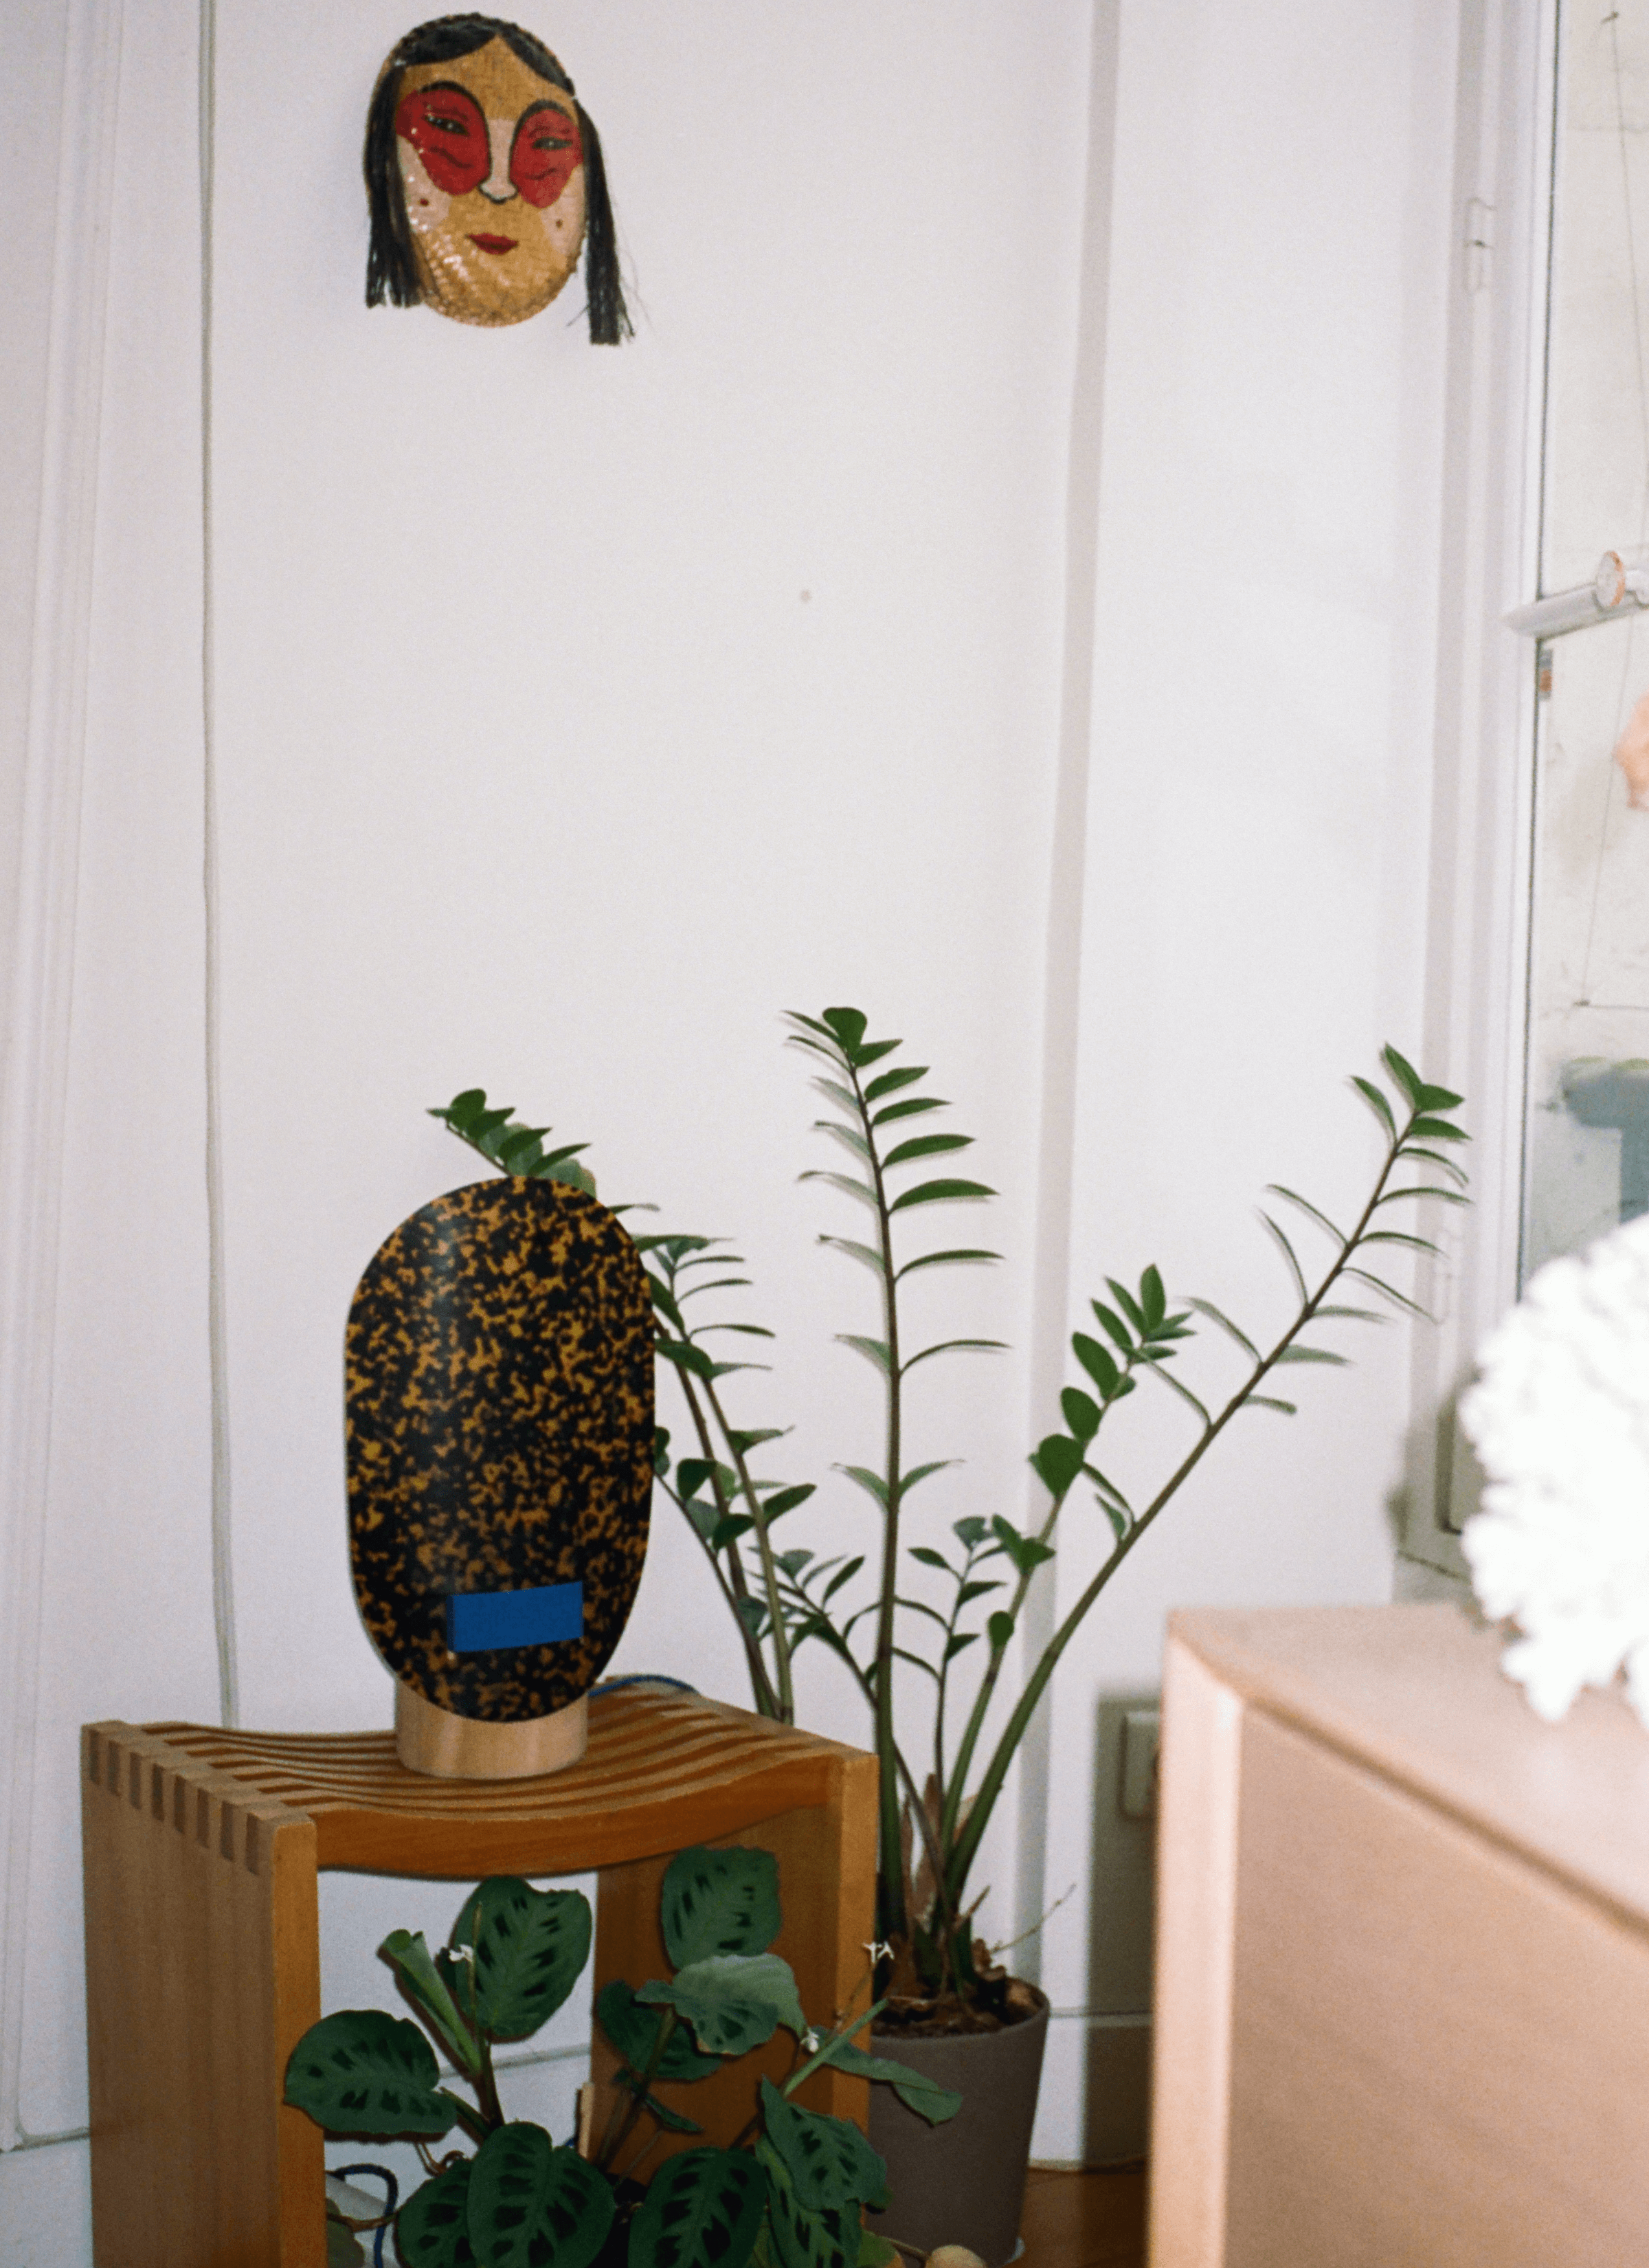 In front of a plant, there is a stone-like decoration sitting on a wooden piece of furniture next to a pot of plants. And there is a female kid-like mask hanging on the wall.